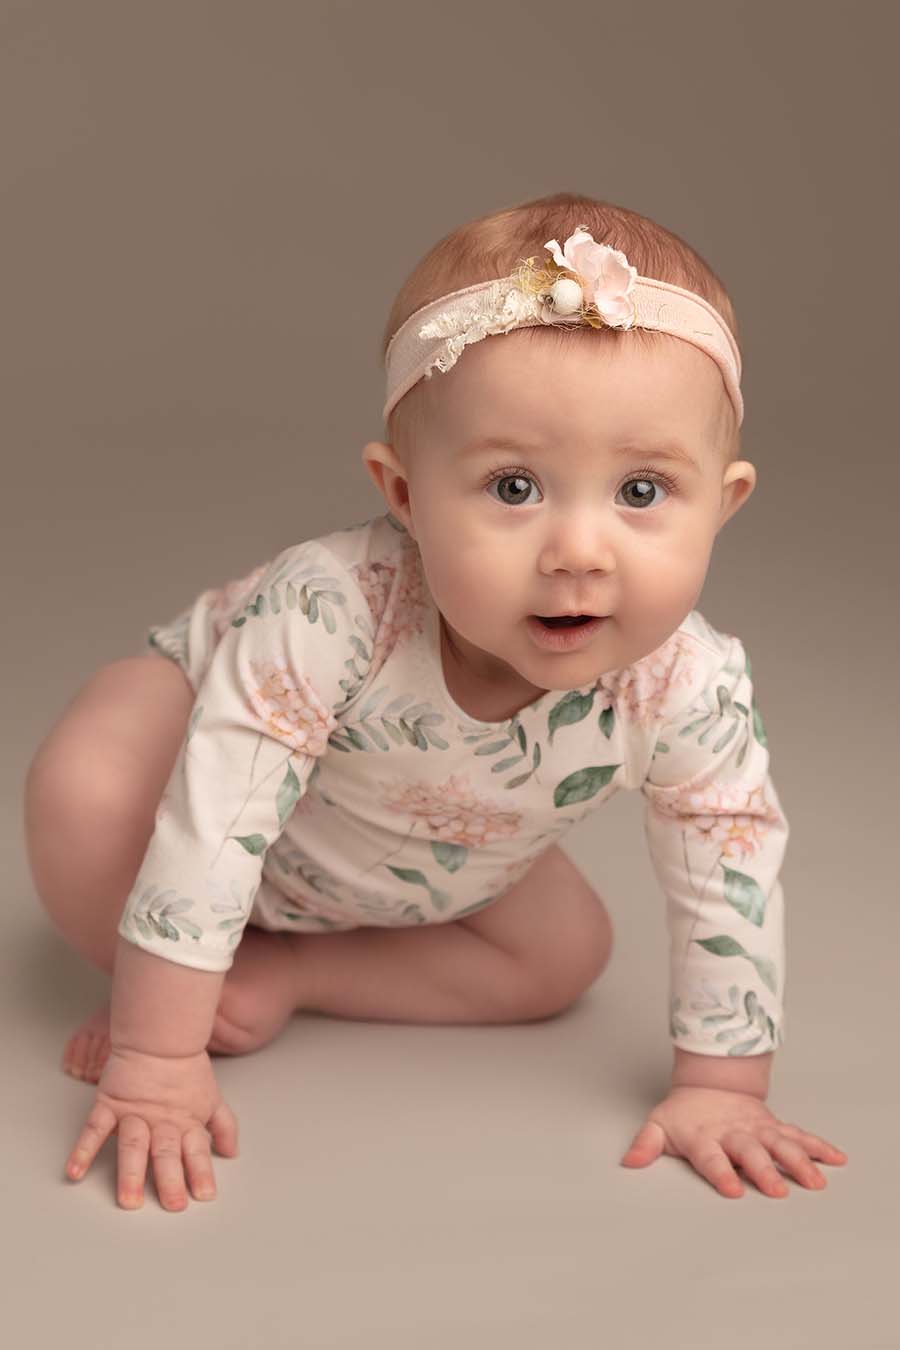 baby poses wearing a romper with long sleeves and flower pattern. she has a matching hairband.